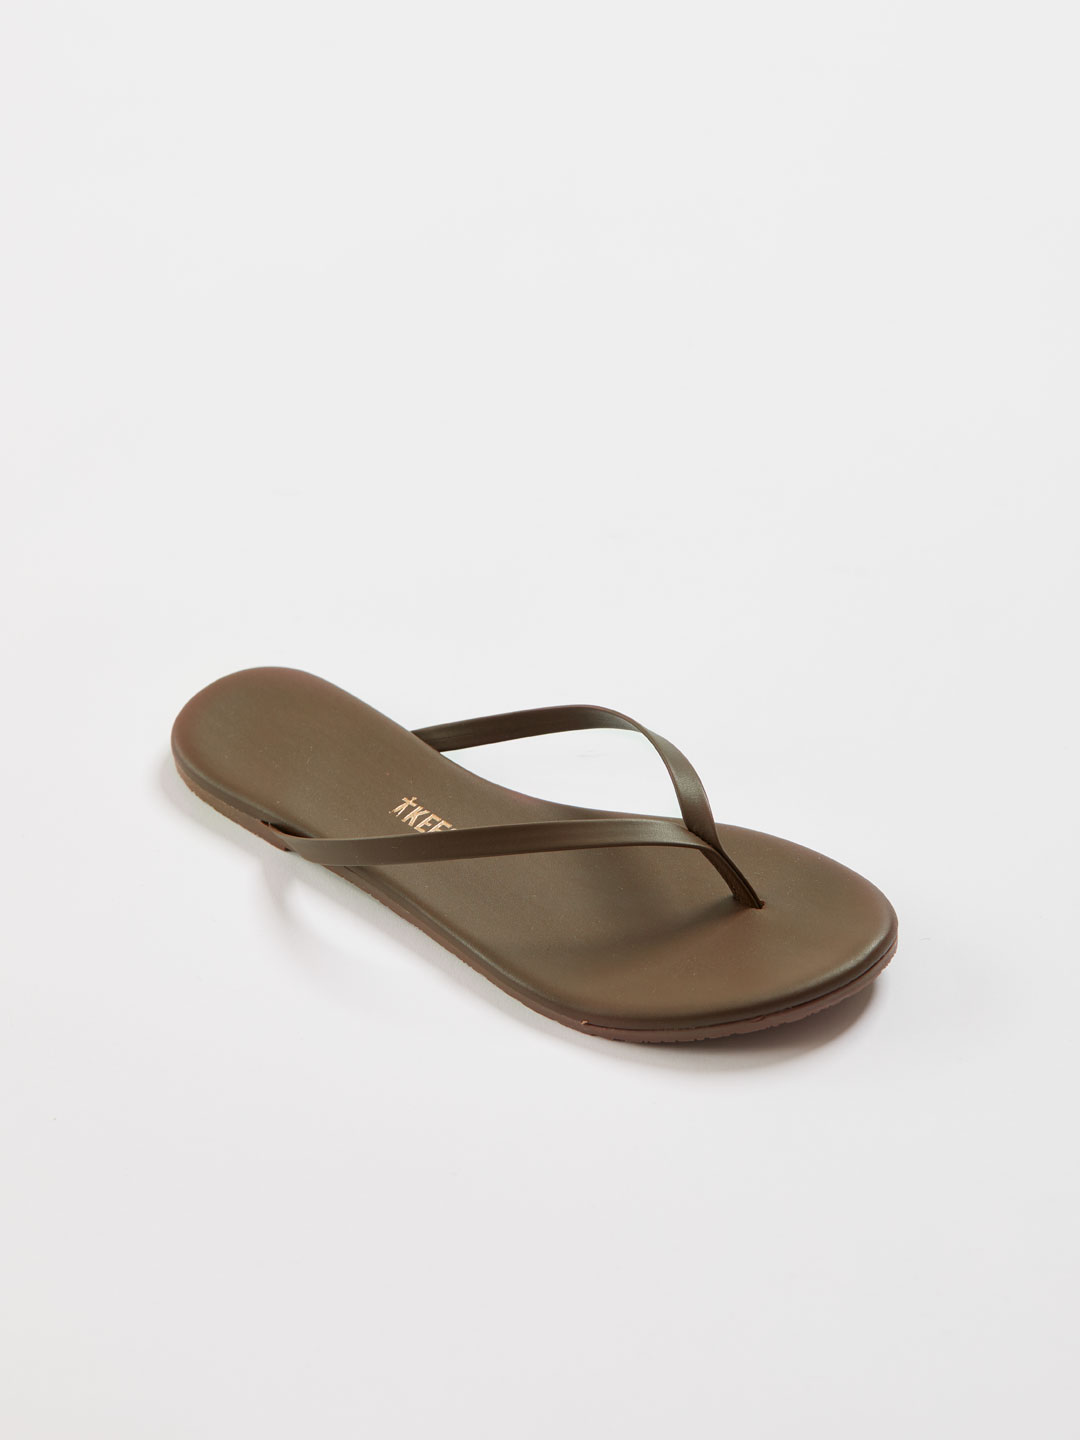 Most Loved Signature Flip Flop Sandals - Coffee/Brown